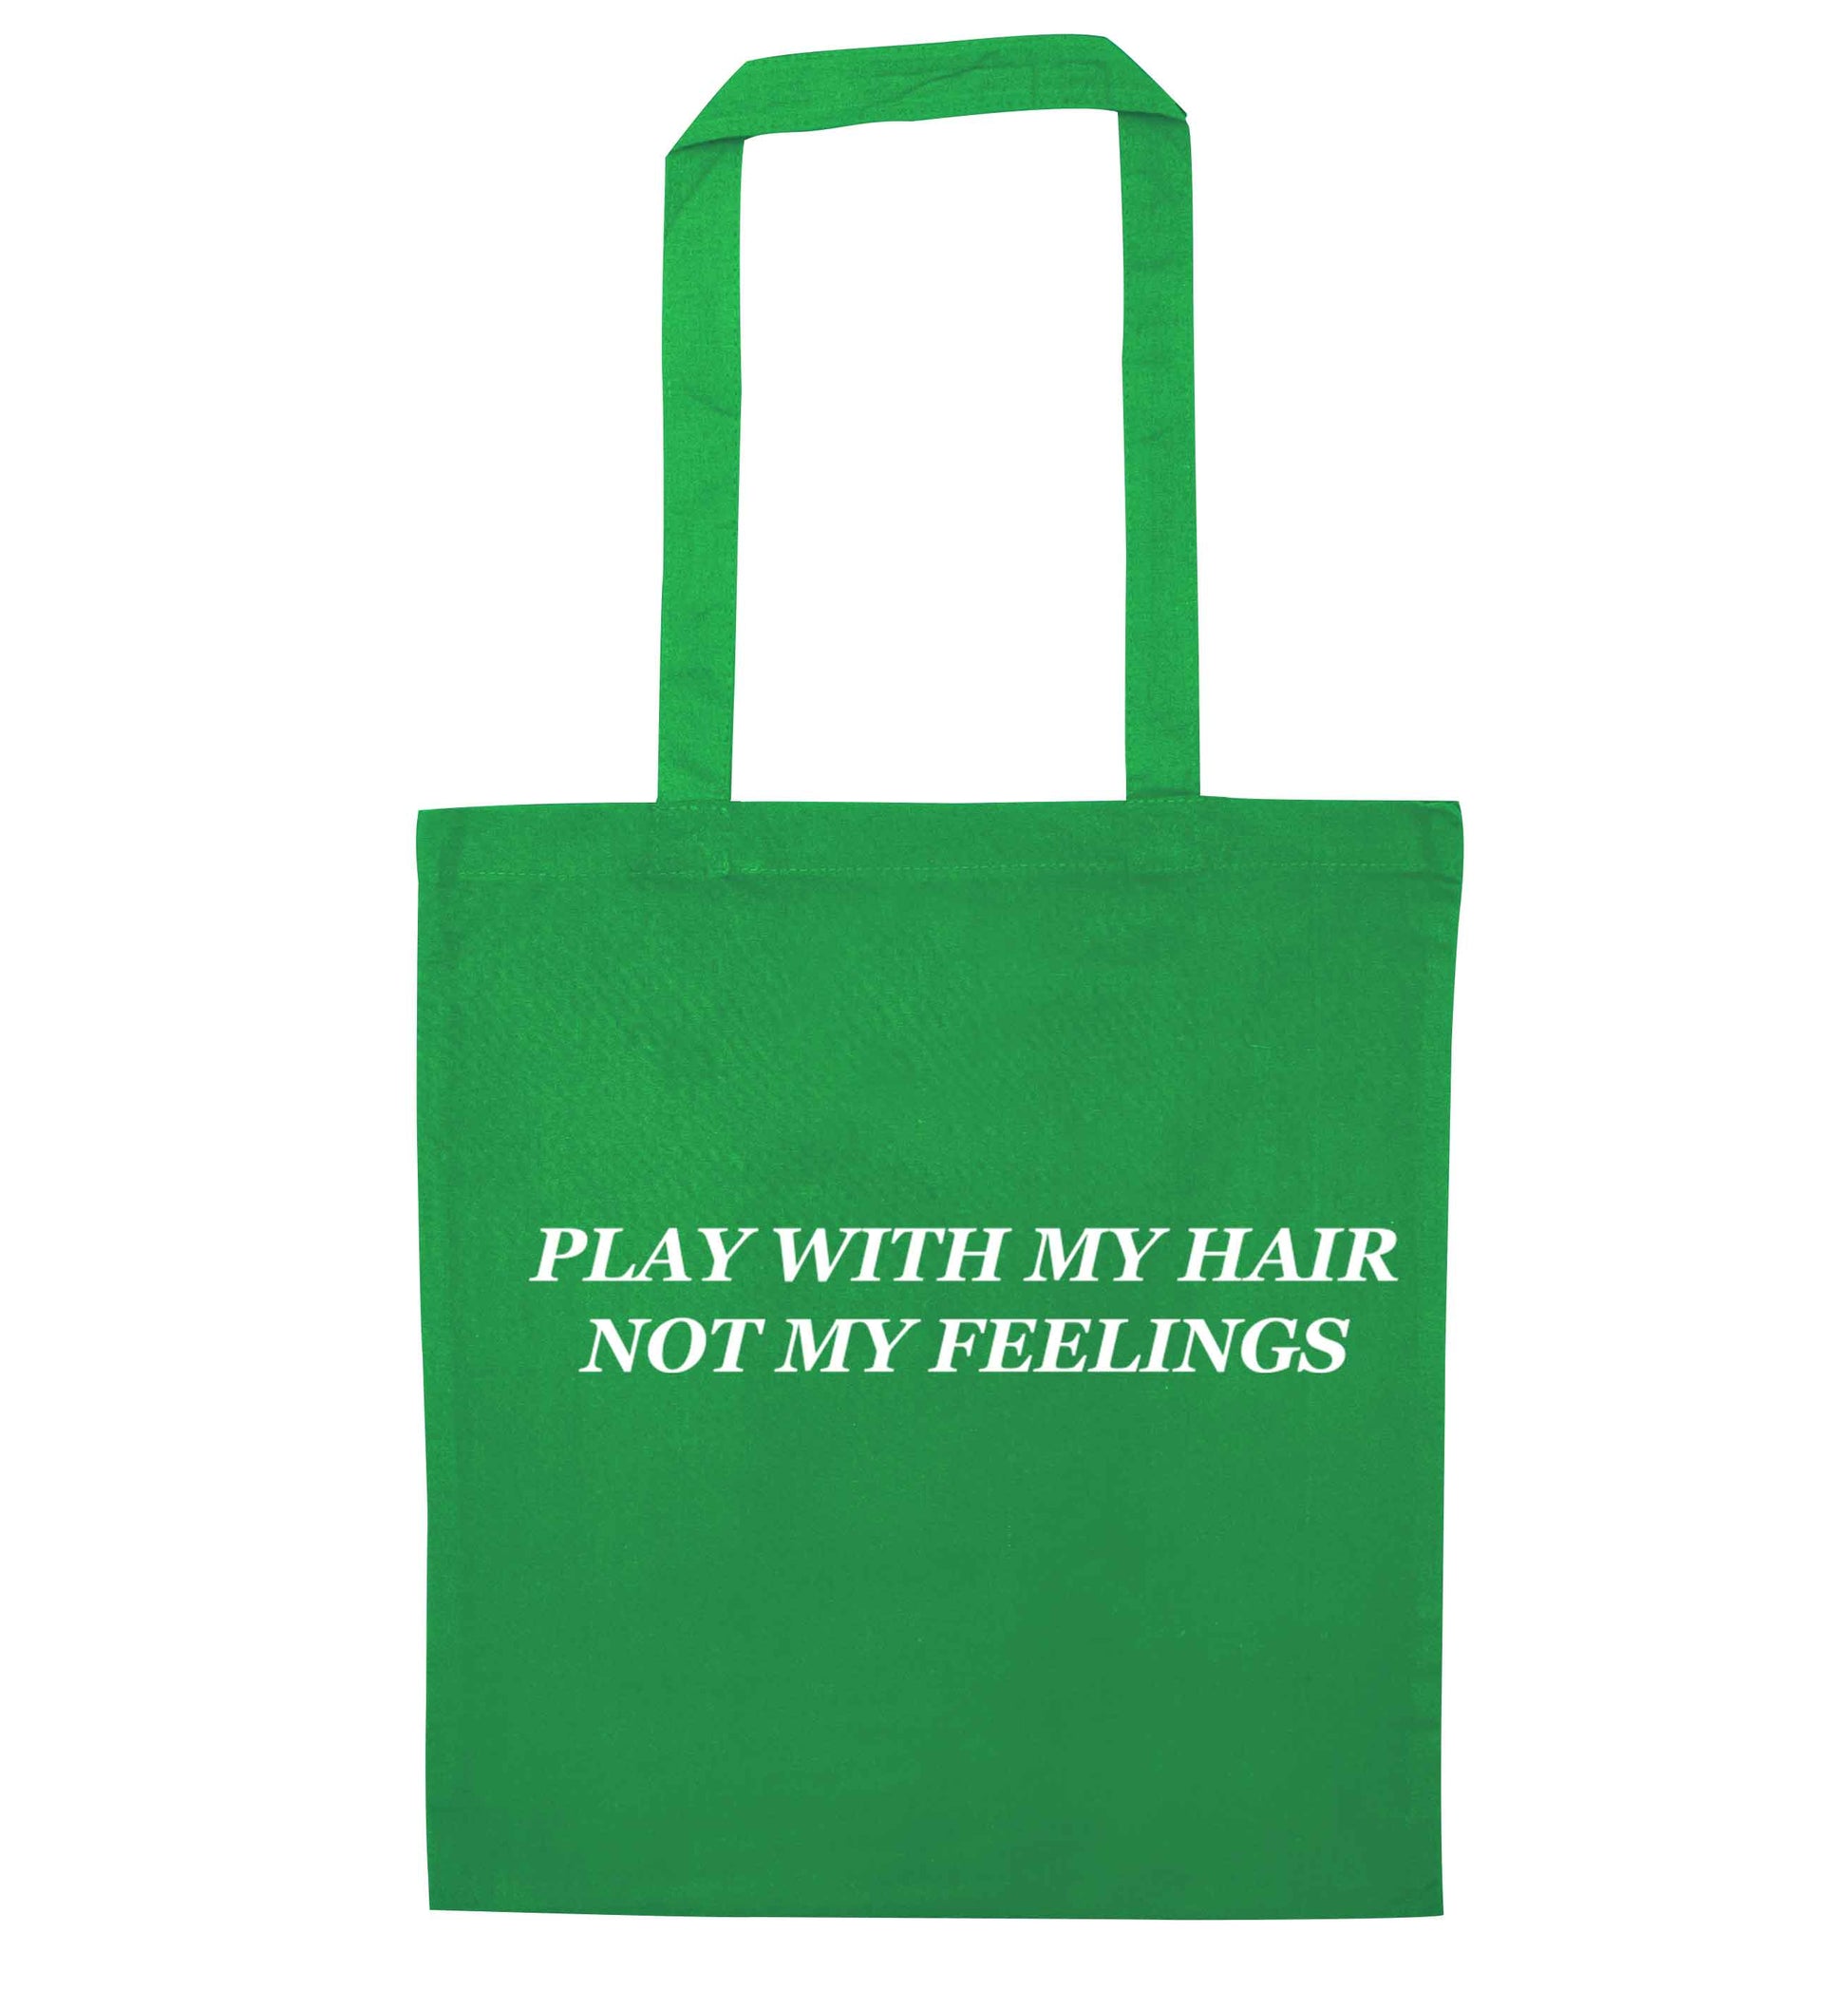 Play with my hair not my feelings green tote bag